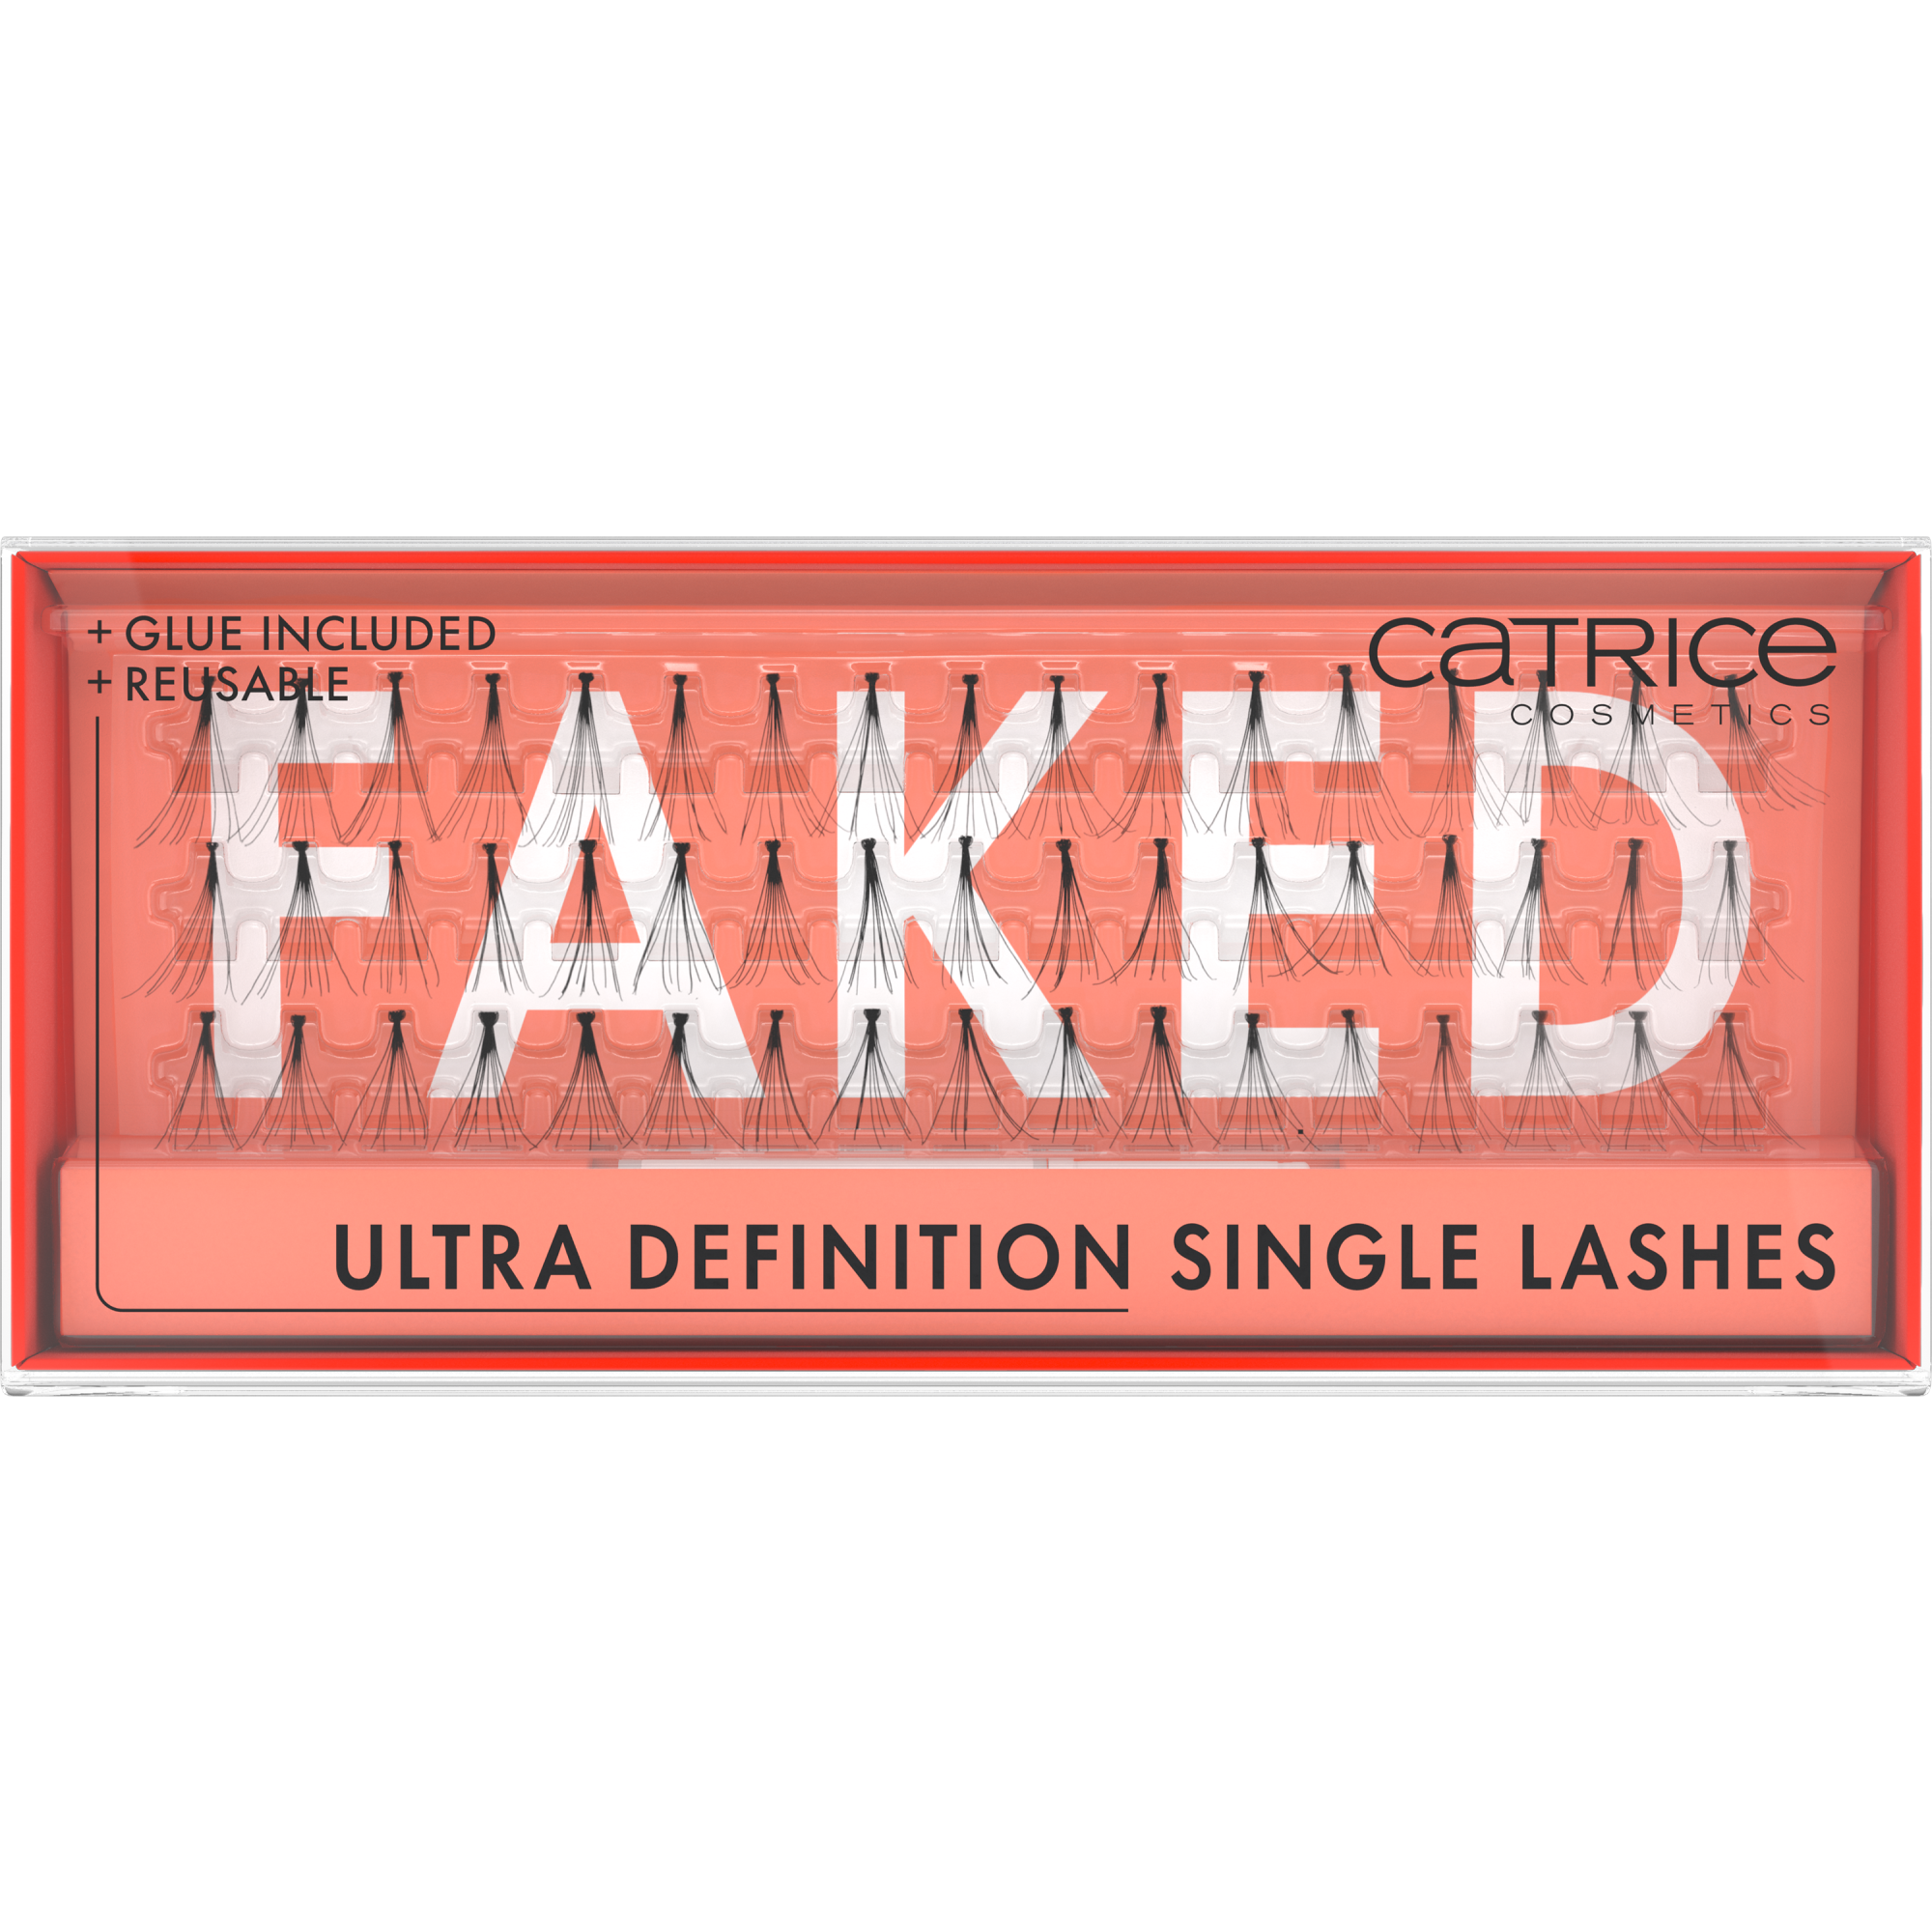 Faked Ultra Definition Single Lashes